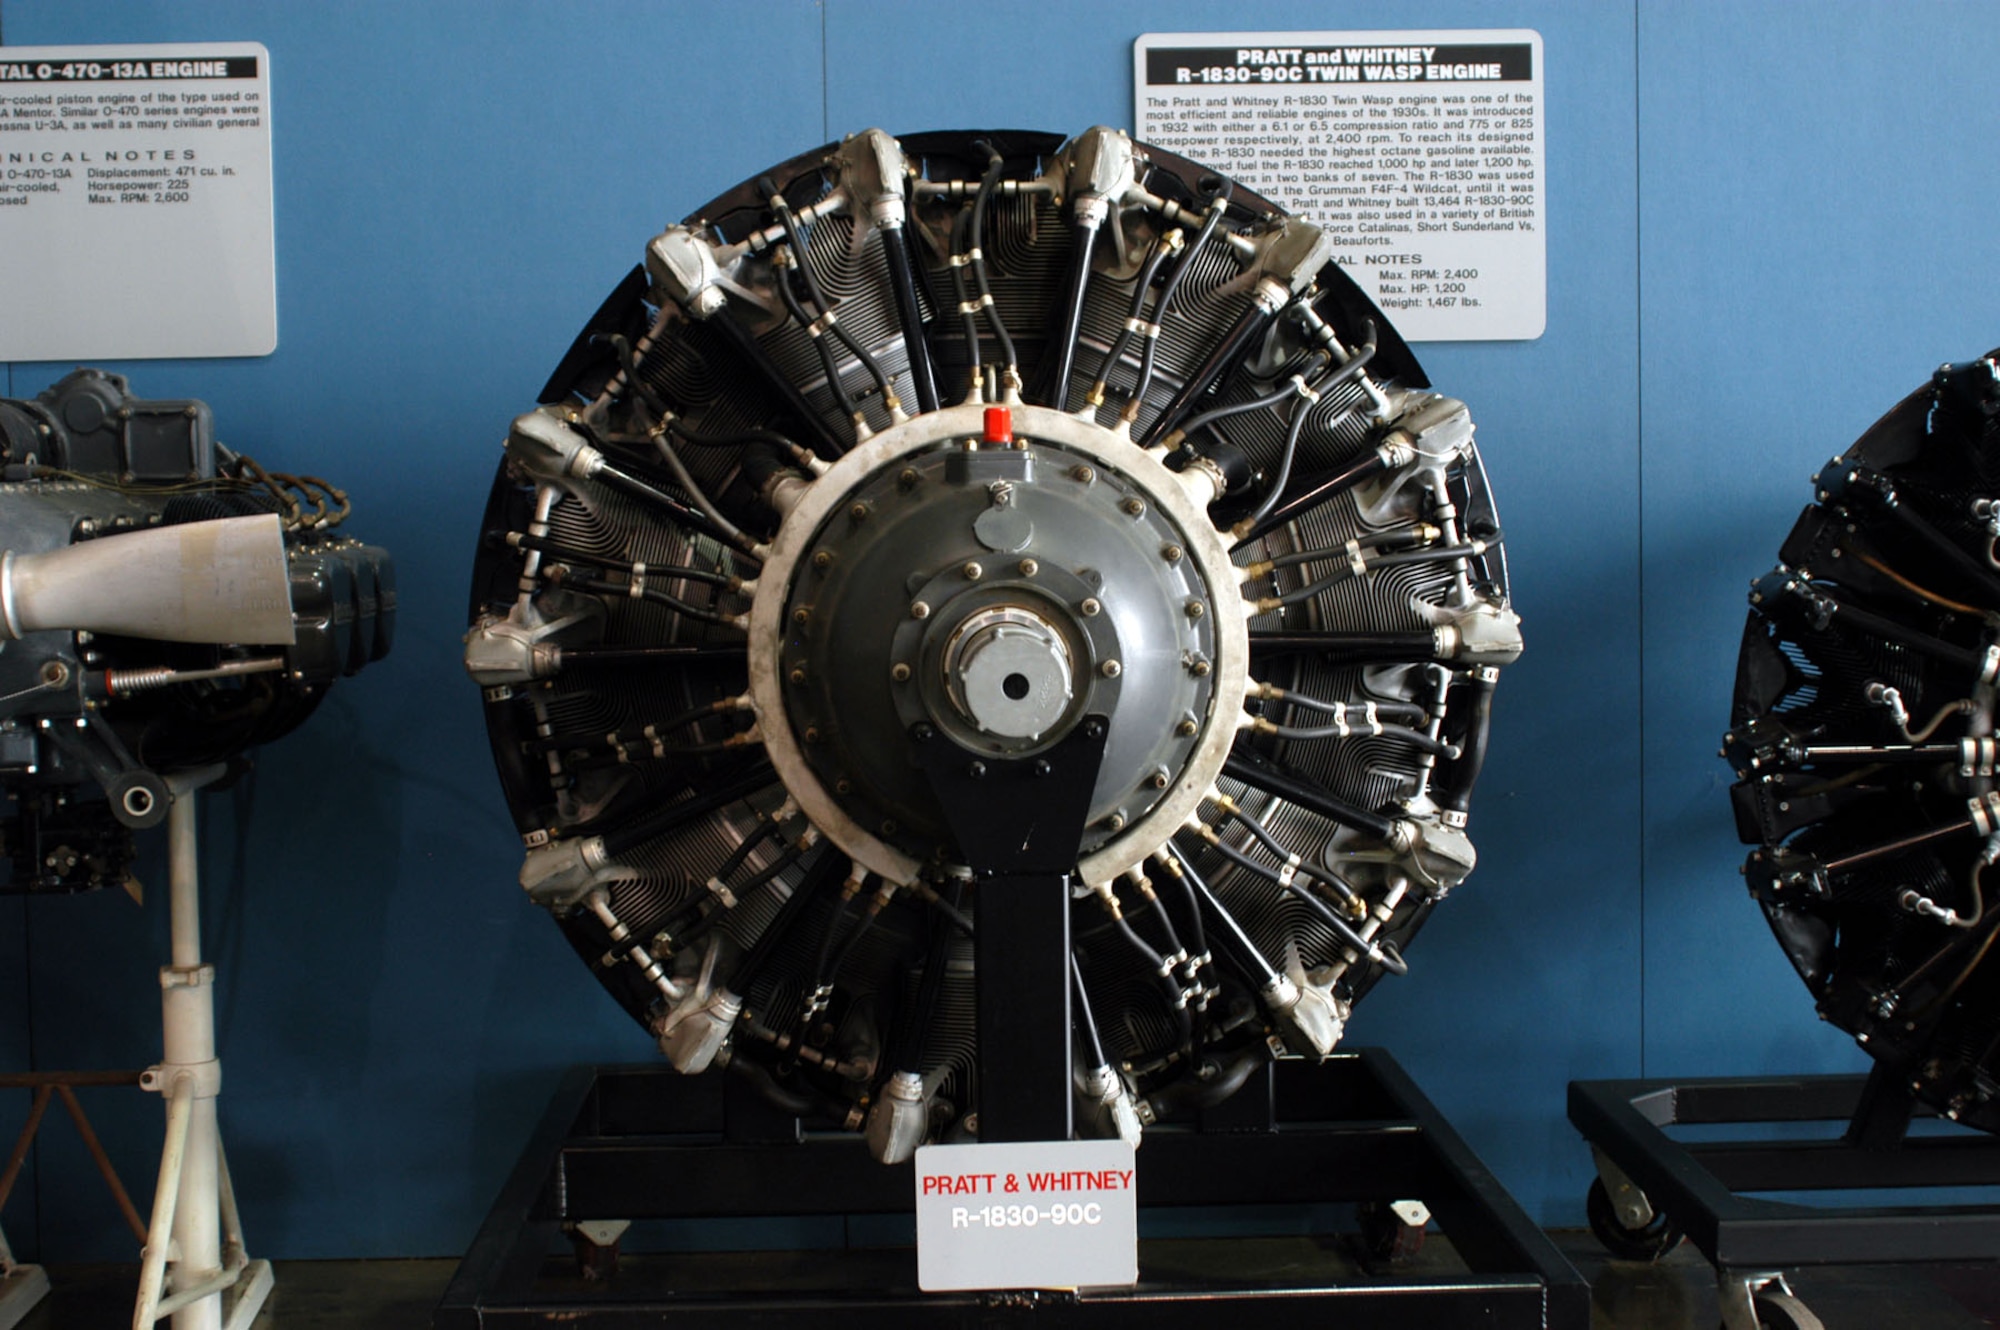 DAYTON, Ohio -- Pratt & Whitney R-1830-90C engine on display in the Presidential Gallery at the National Museum of the United States Air Force. (U.S. Air Force photo)